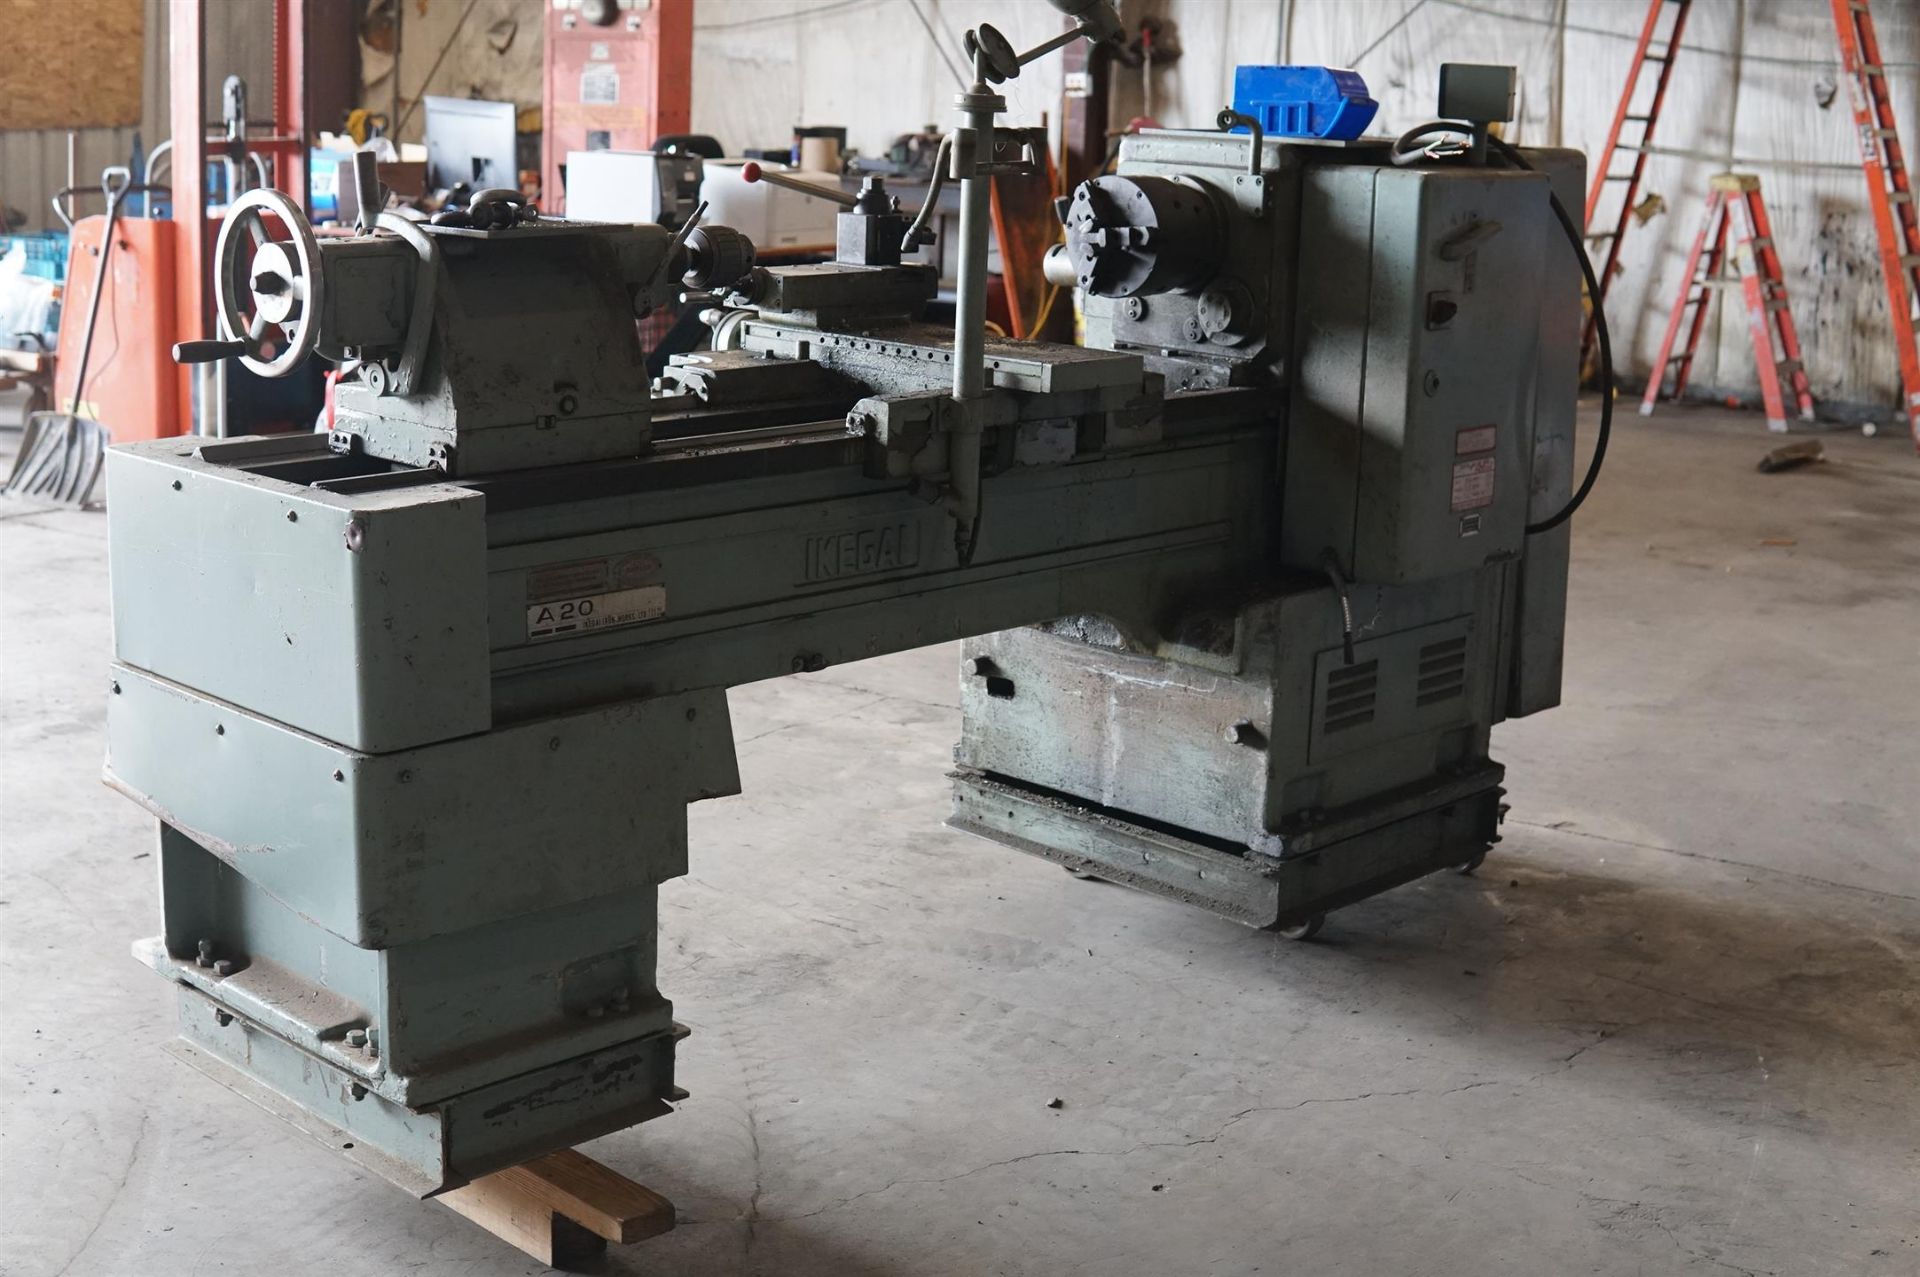 IKEGAL A-20 Ind Lathe- (LOADING FEE - $50) - Image 3 of 18